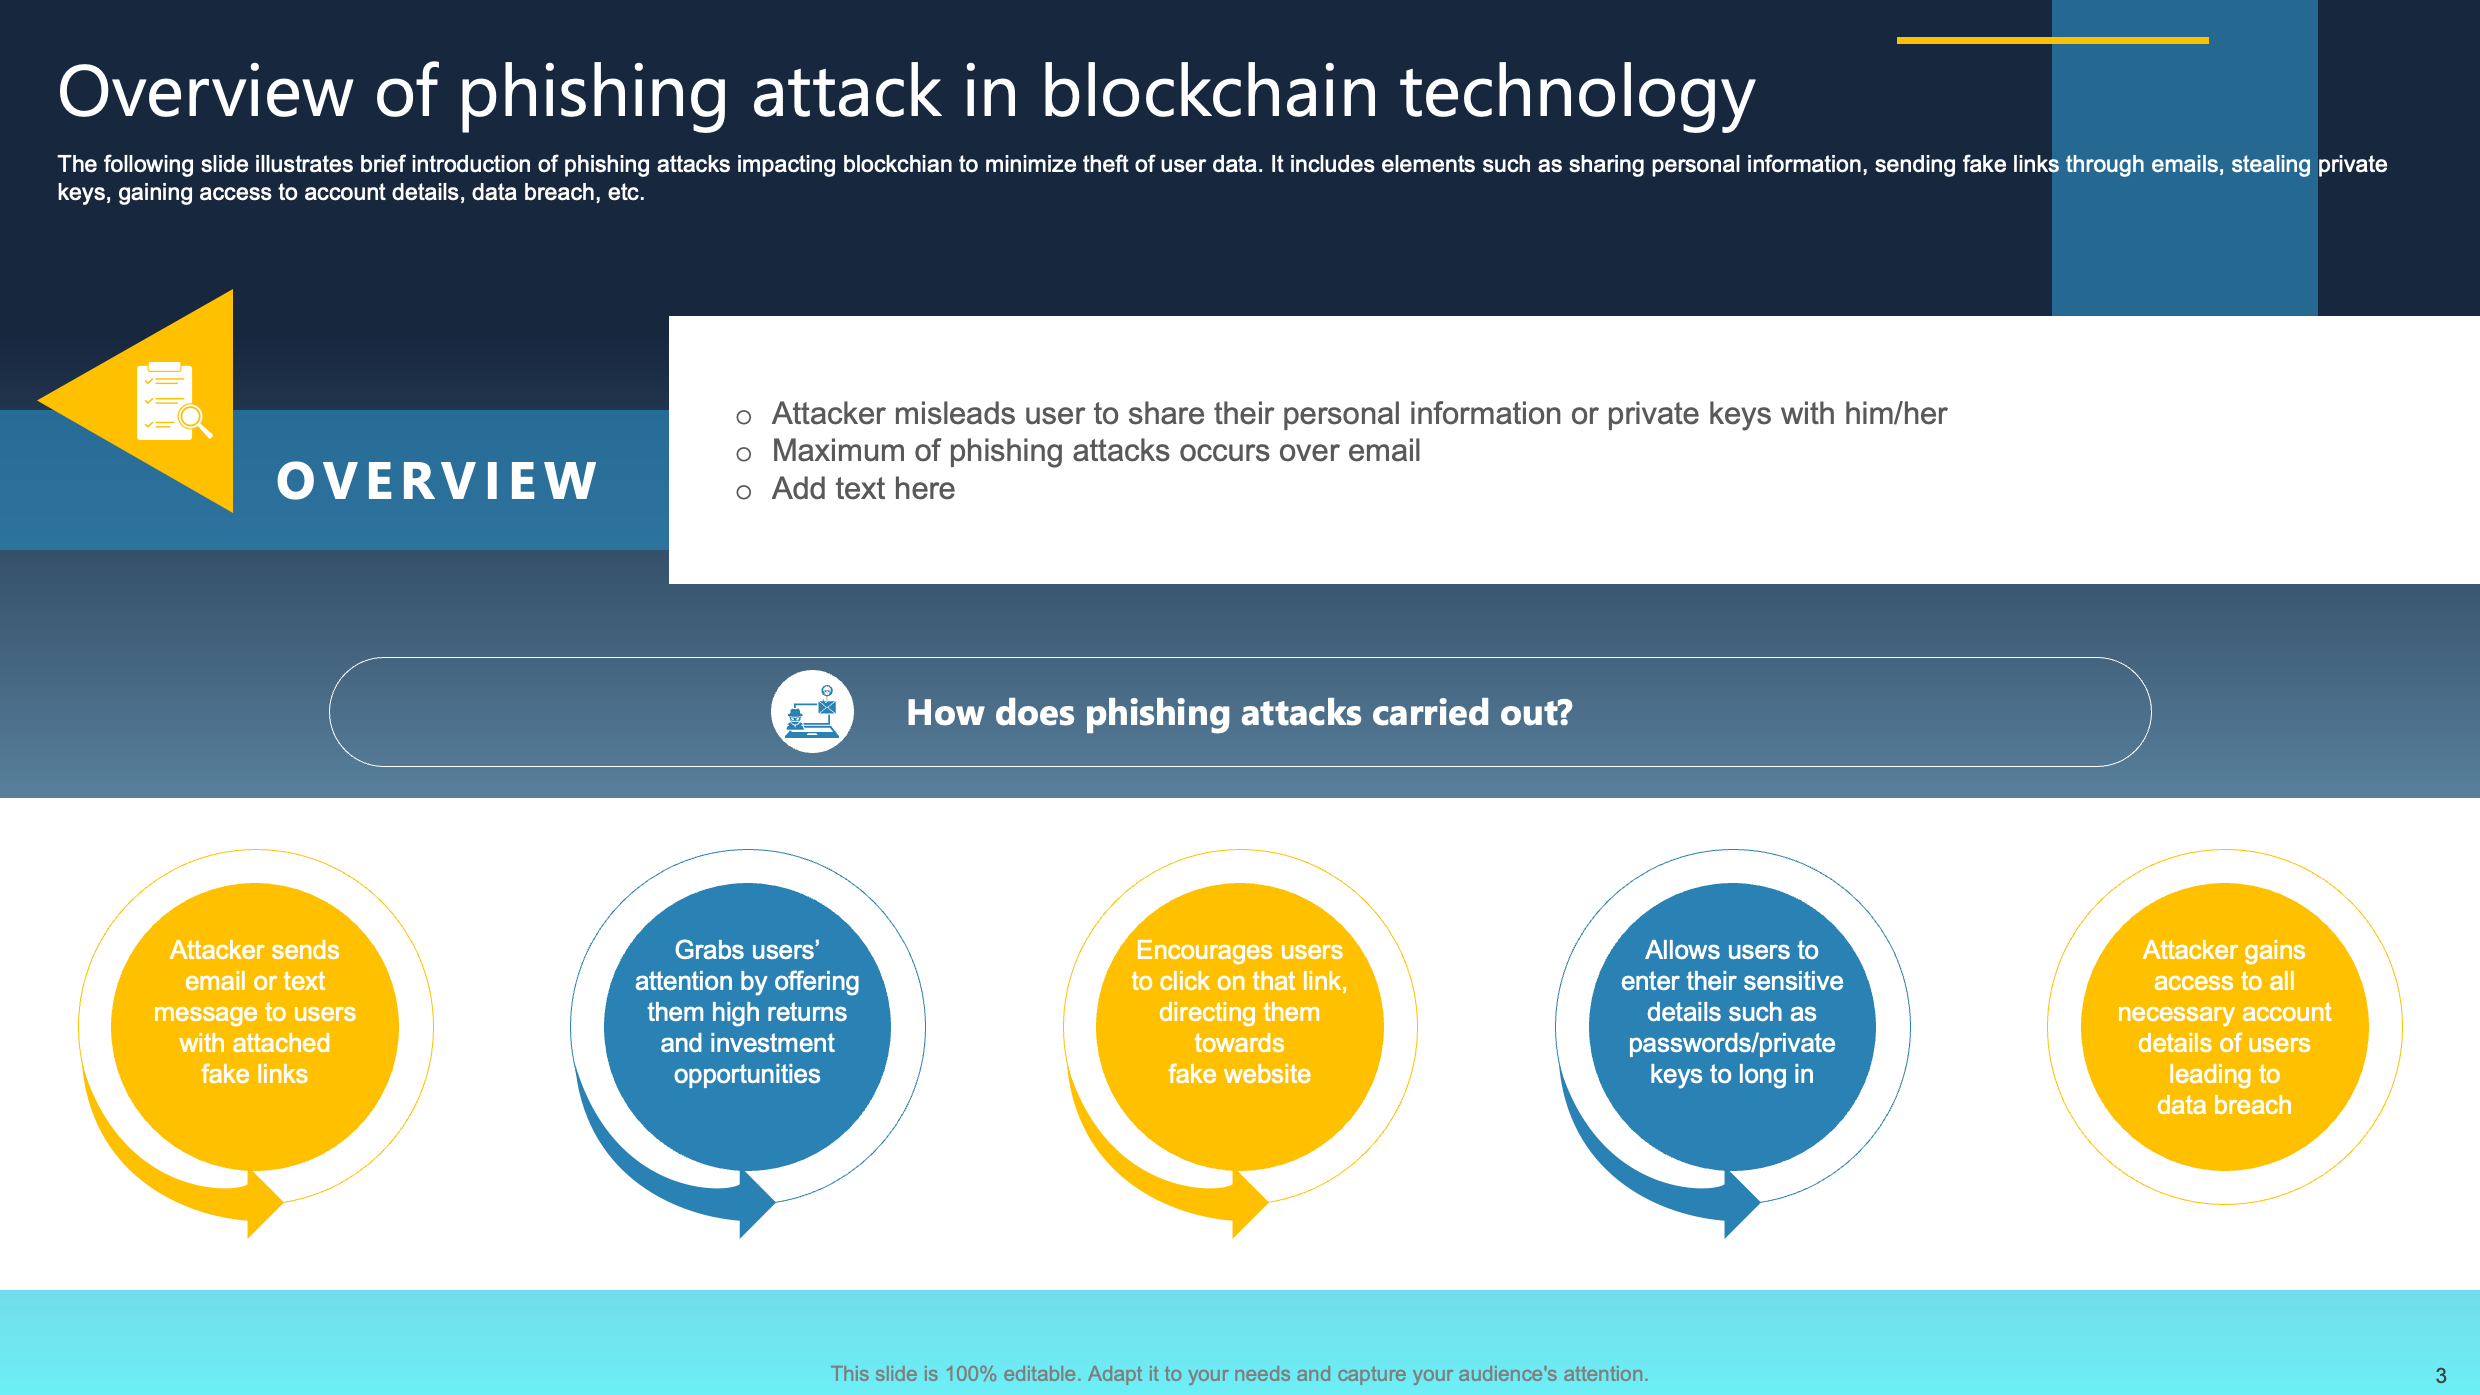 Overview of Phishing Attack in Blockchain Technology